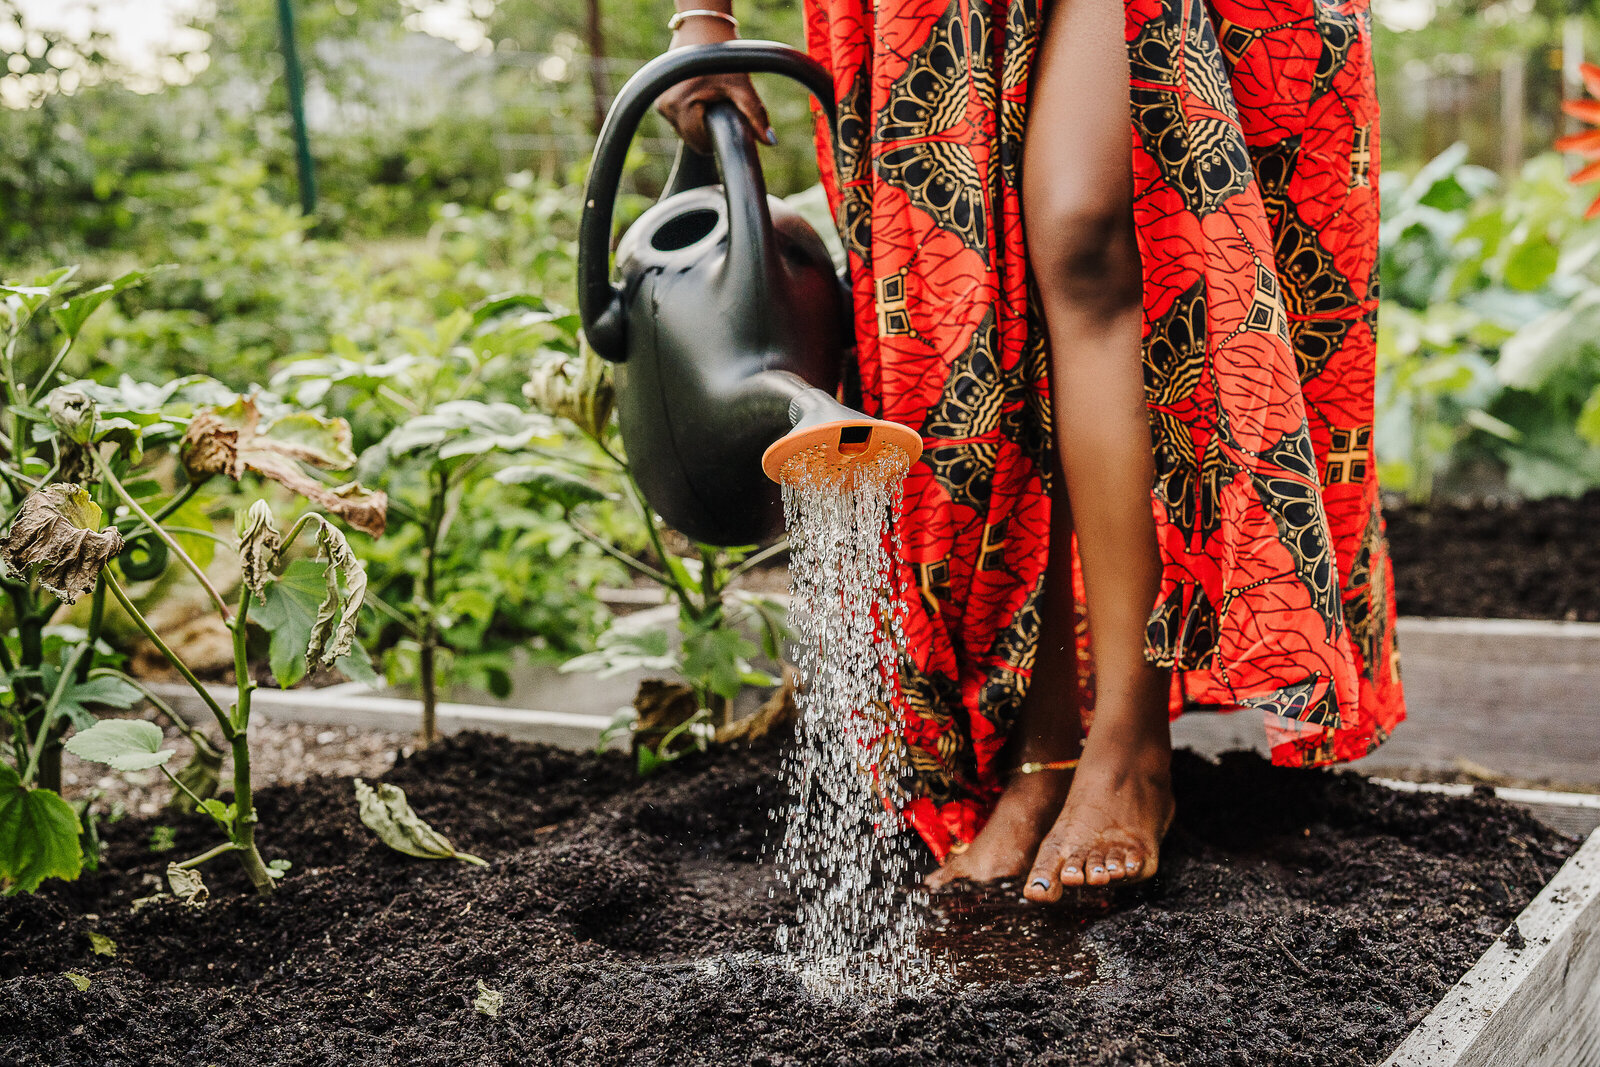 woman in African dress in garden barefoot pours water